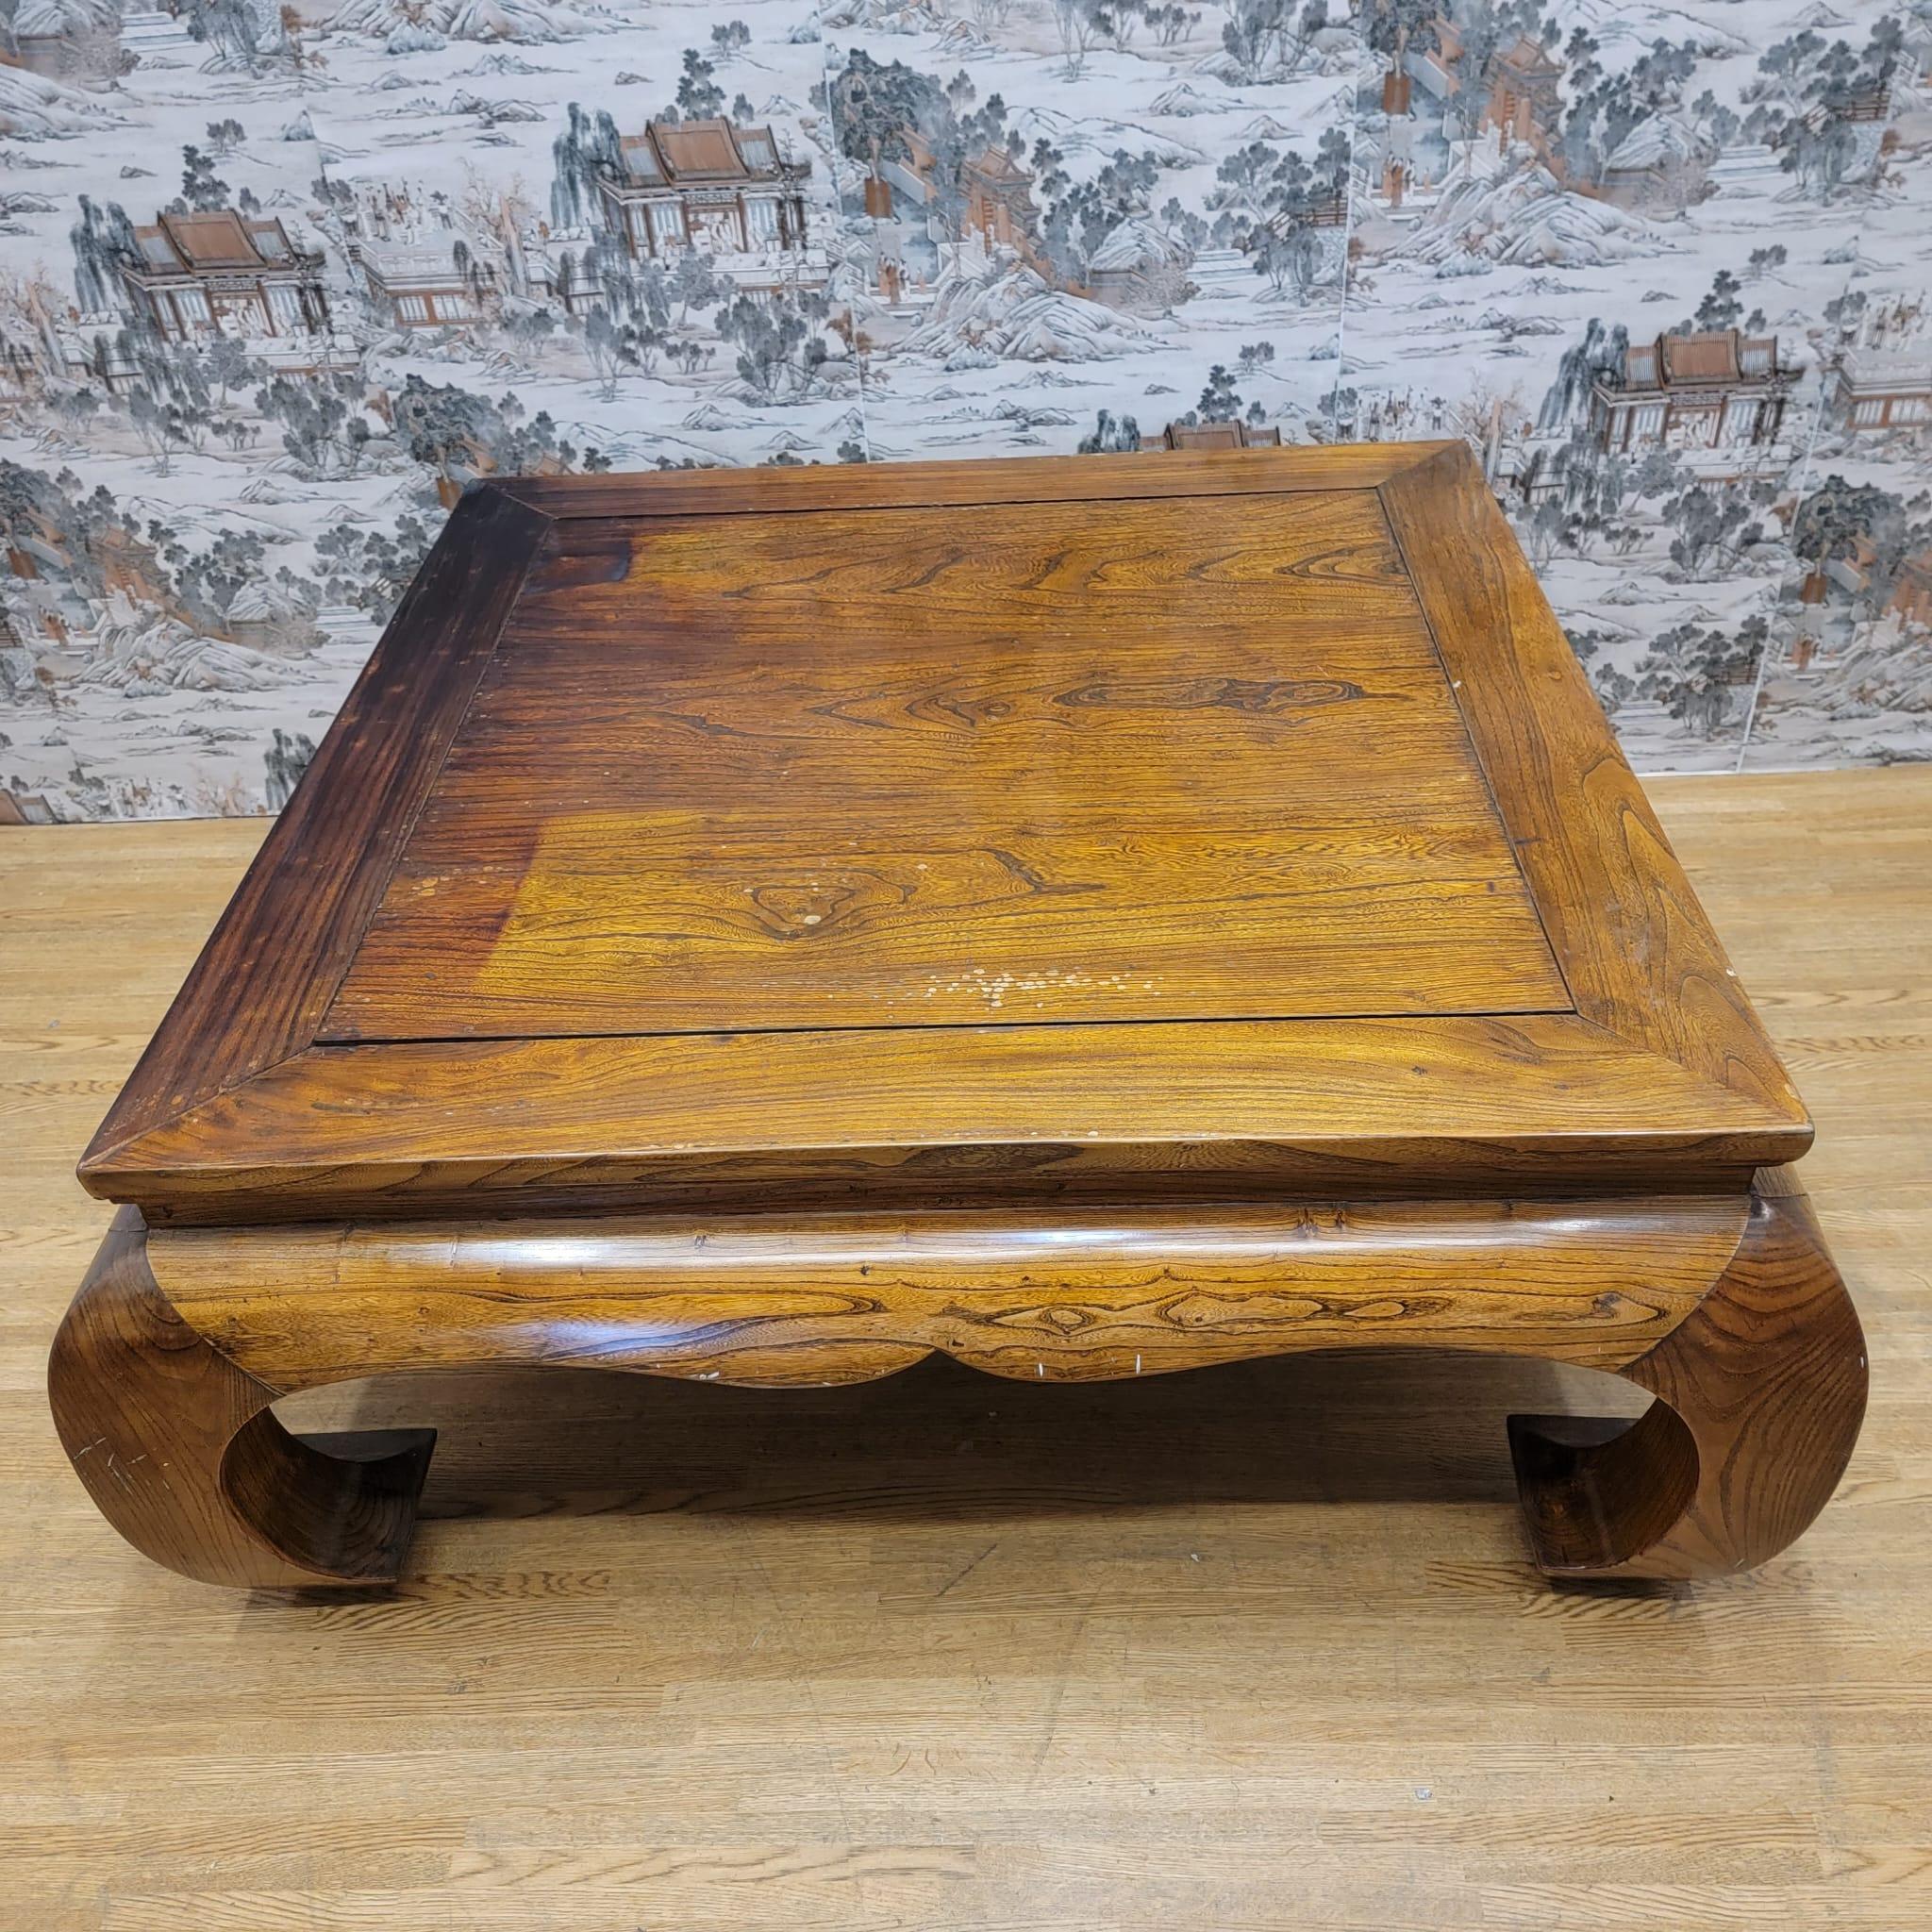 Antique Shanxi Province Kang style natural Elm coffee table

This antique Shanxi Province elm coffee table in the kang style has its original color and patina. 

Circa: 1900

Dimensions:

W: 48